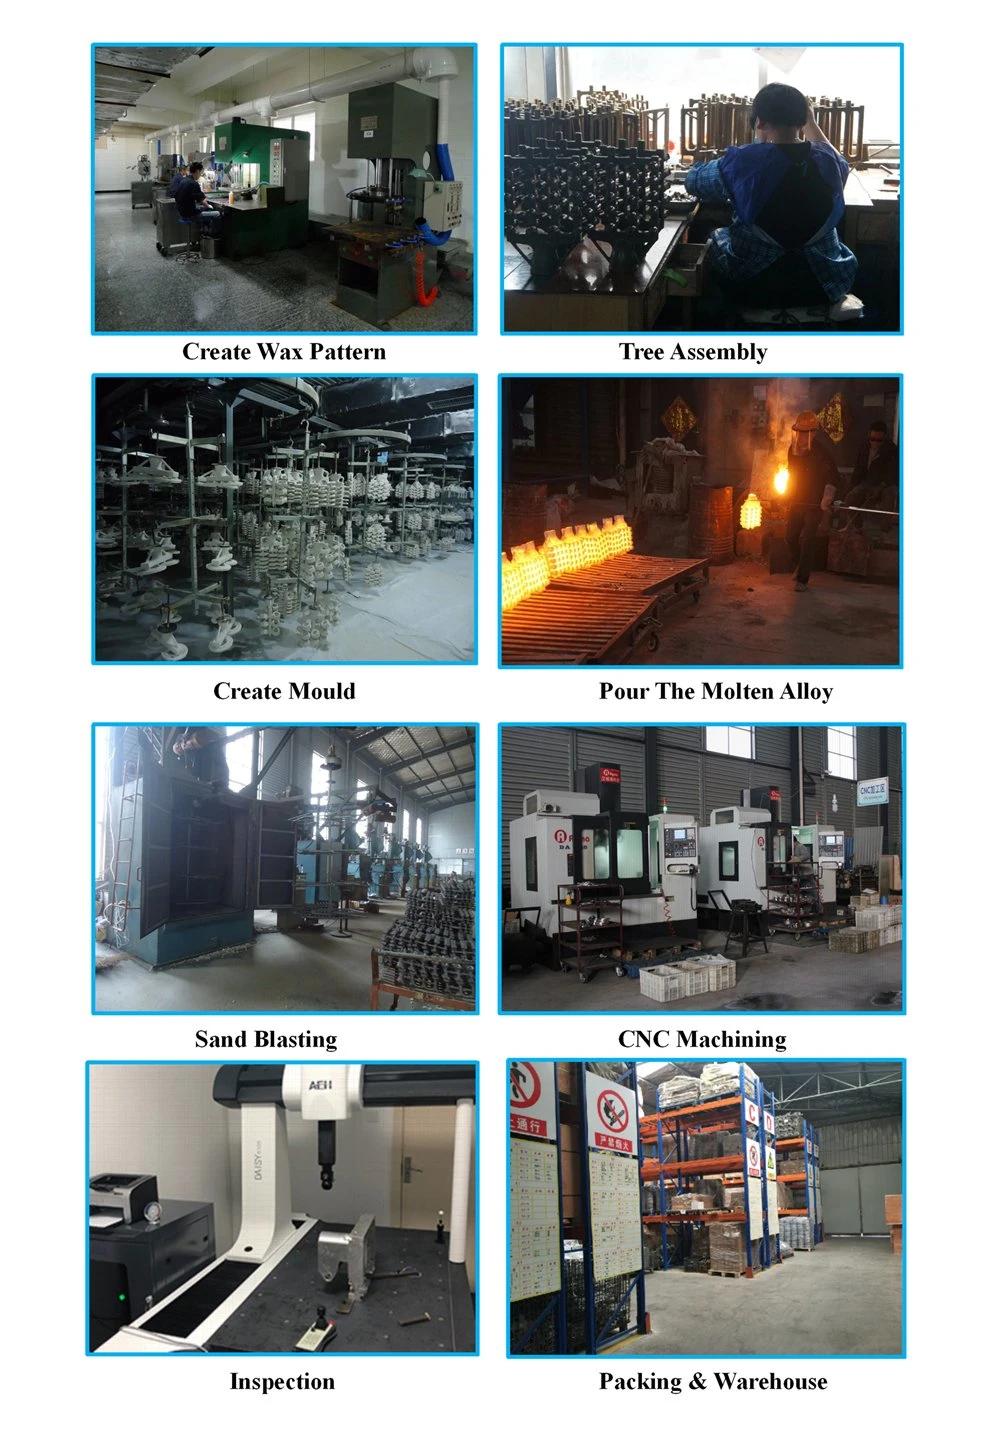 Lost Wax Casting Wax Casting Lost Wax Carbon Steel Investment Casting Parts